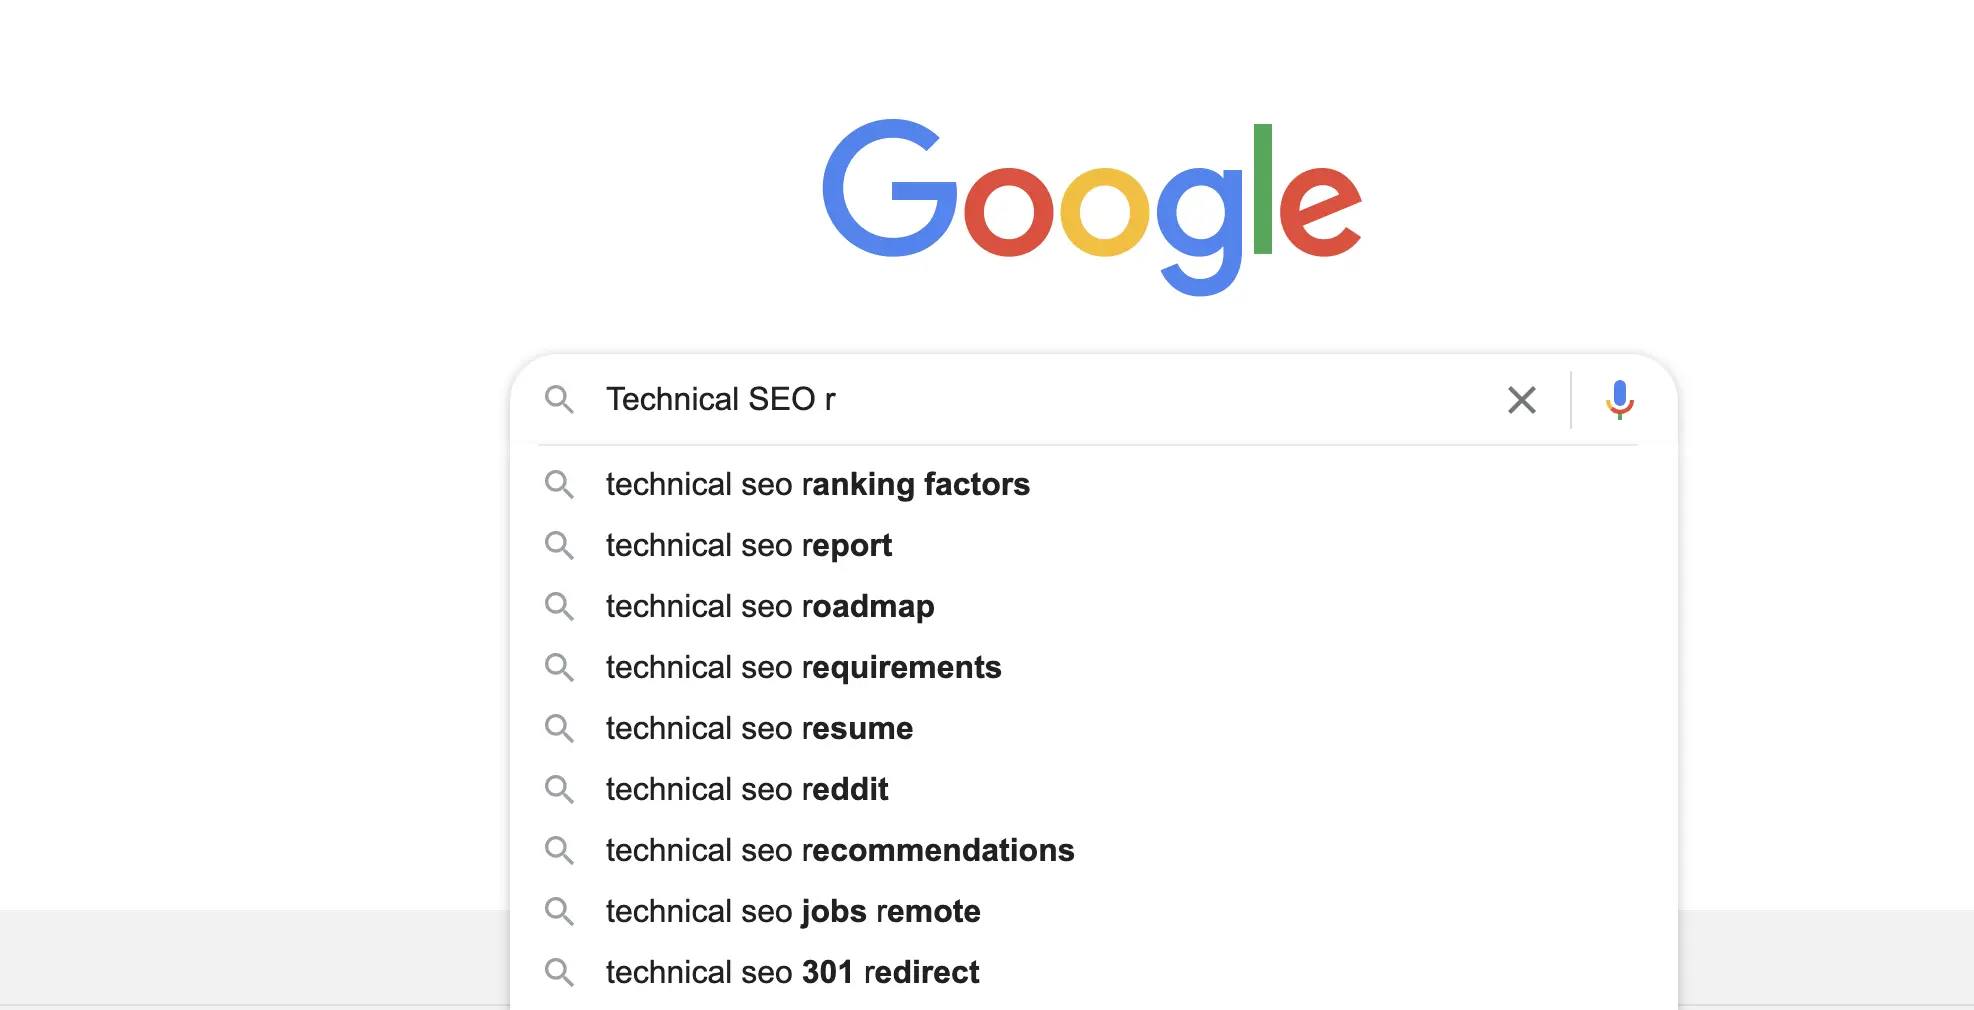 Search Term Followed by Space and a Letter - Google Autocomplete